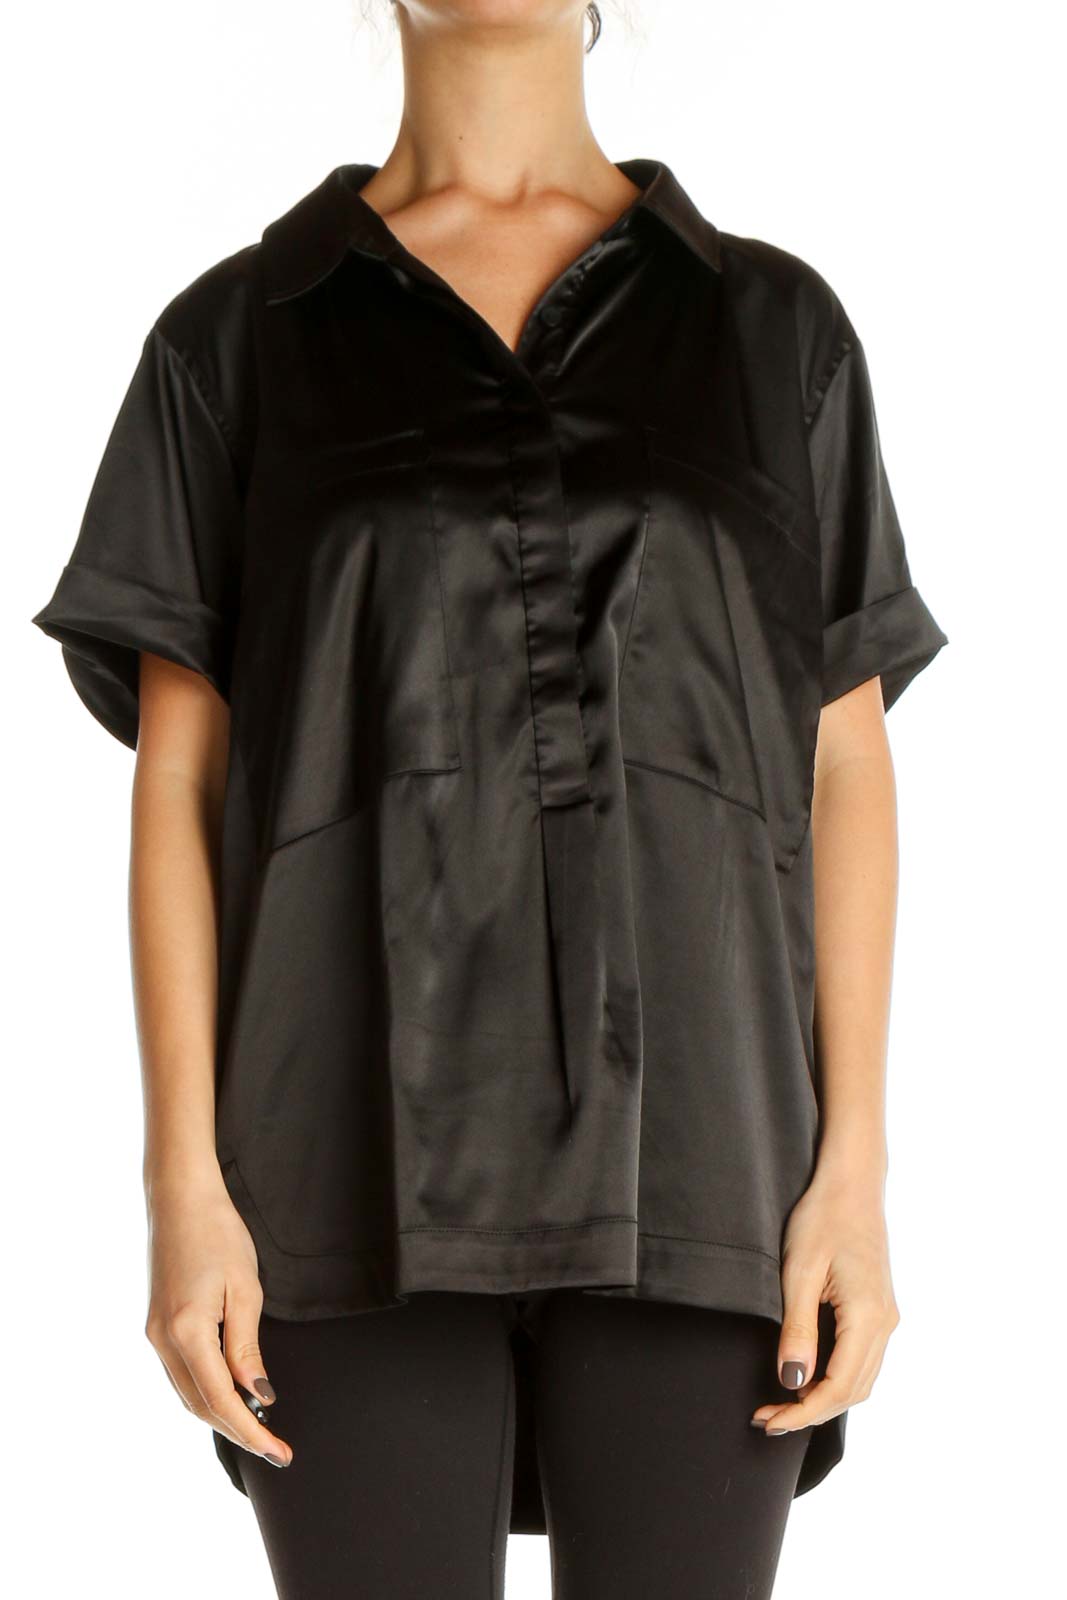 Black Solid All Day Wear Shirt Front